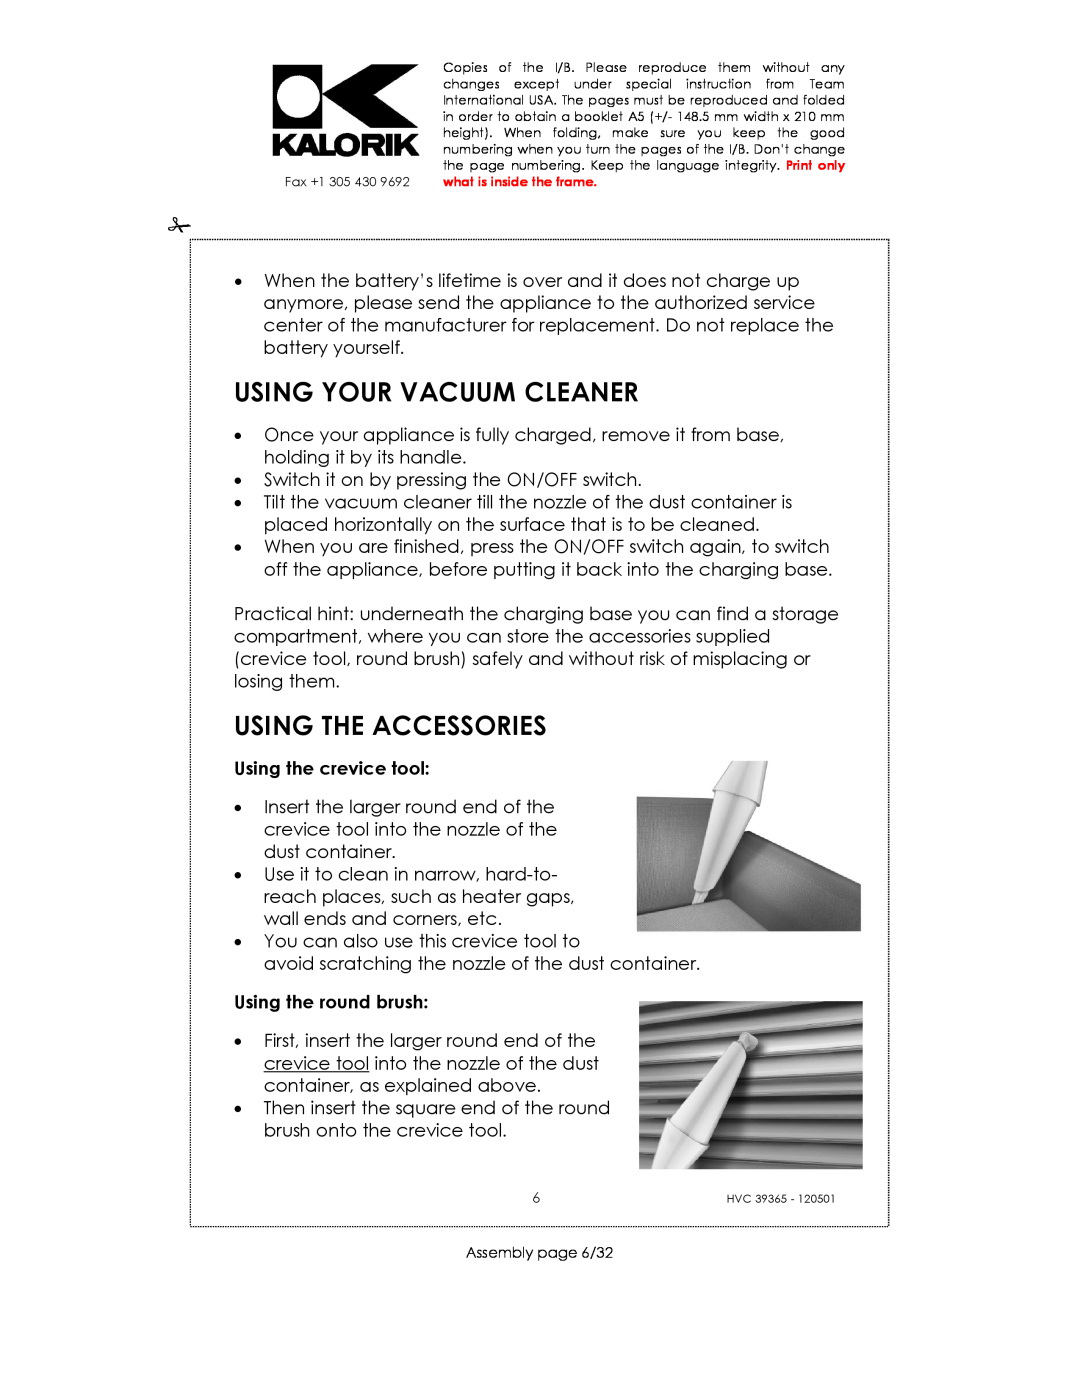 Kalorik HVC 39365 manual Using Your Vacuum Cleaner, Using The Accessories, Using the crevice tool, Using the round brush 